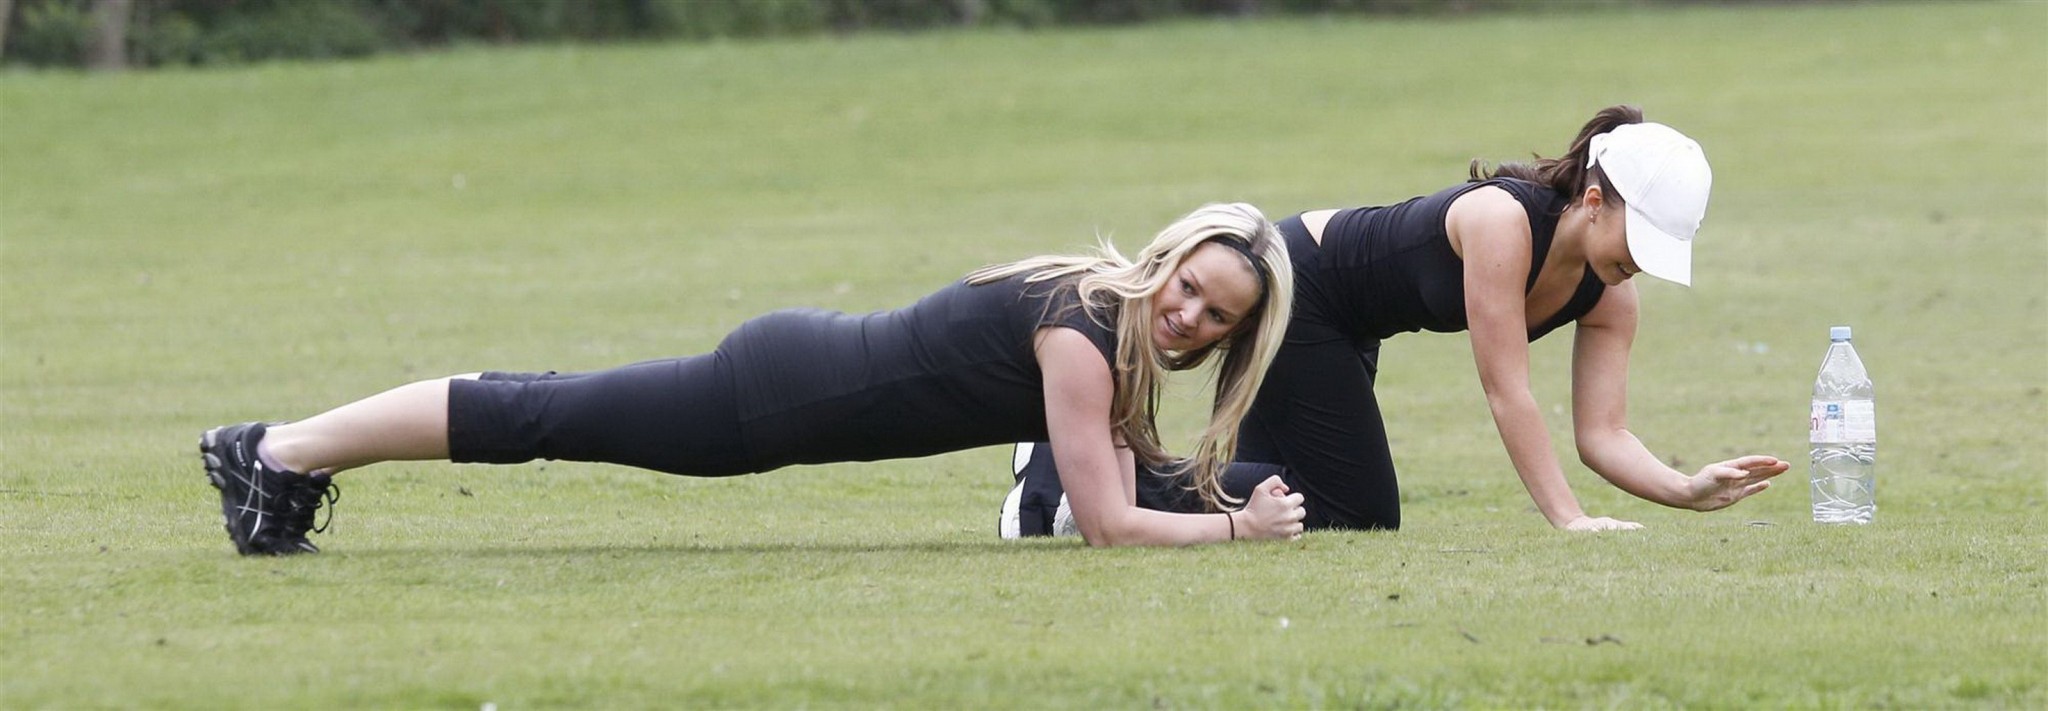 Jennifer Ellison shows off her ass in tight sweatpants while working out in Live #75305707